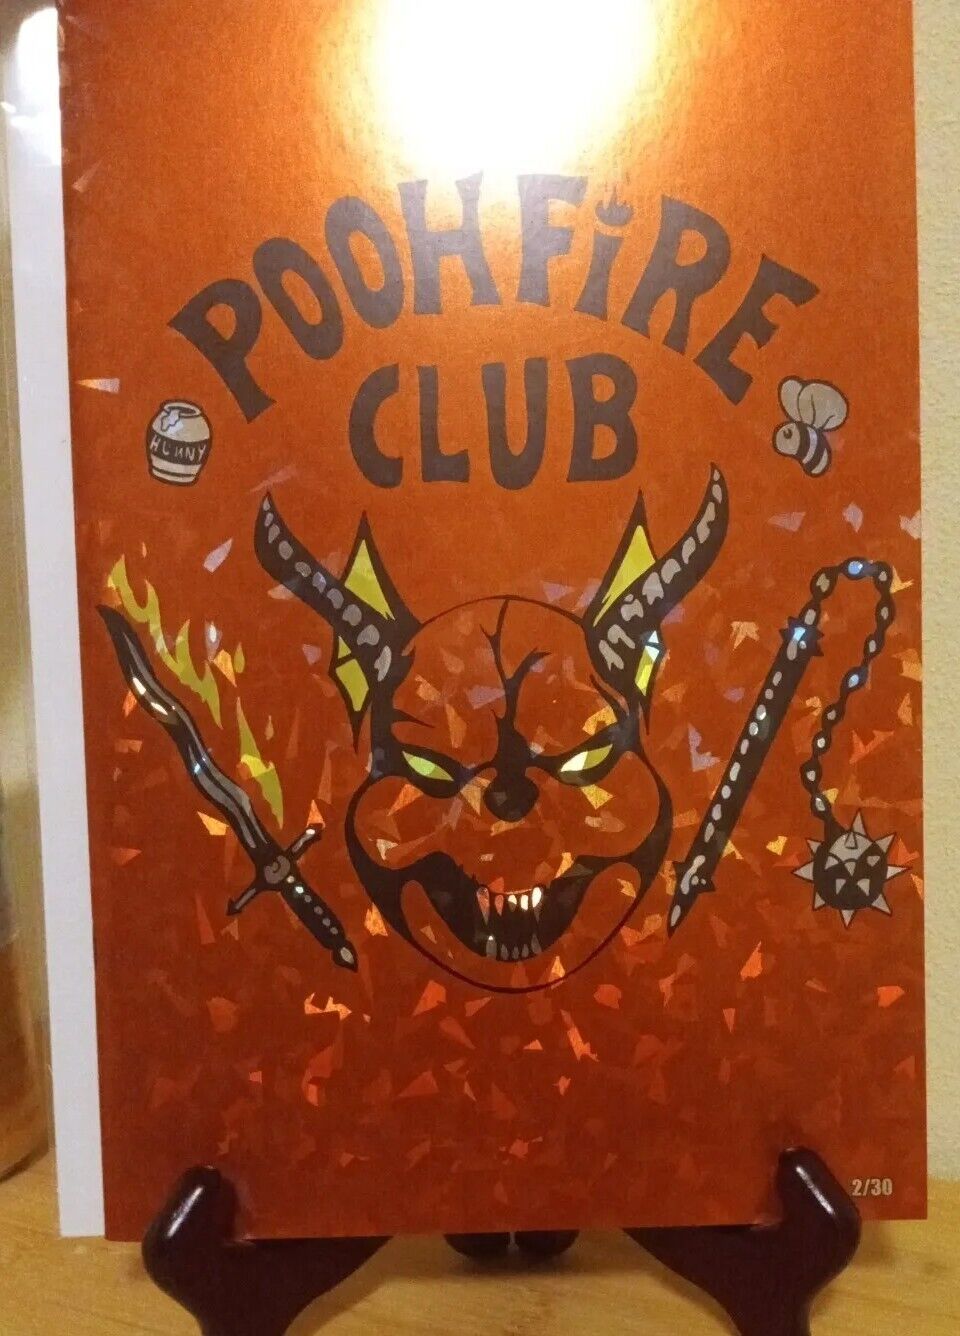 DO YOU POOH Lava Foil Exclusive POOHFIRE CLUB -Limited to 30💥RARE💥NM